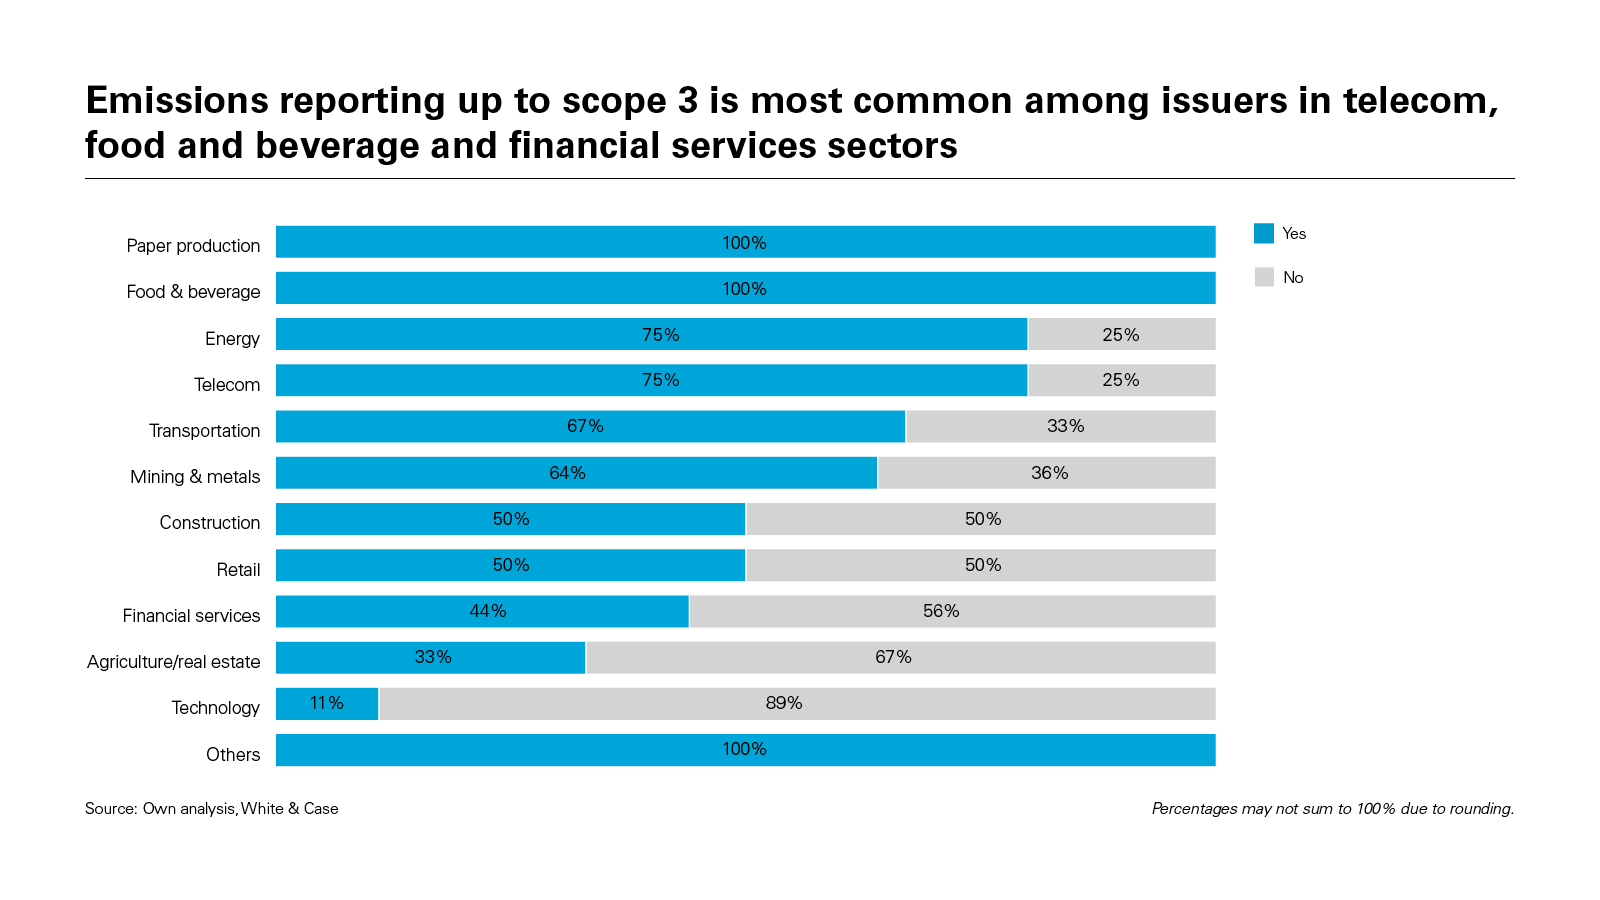 Emissions reporting up to scope 3 is most common among issuers in telecom, food and beverage and financial services sectors